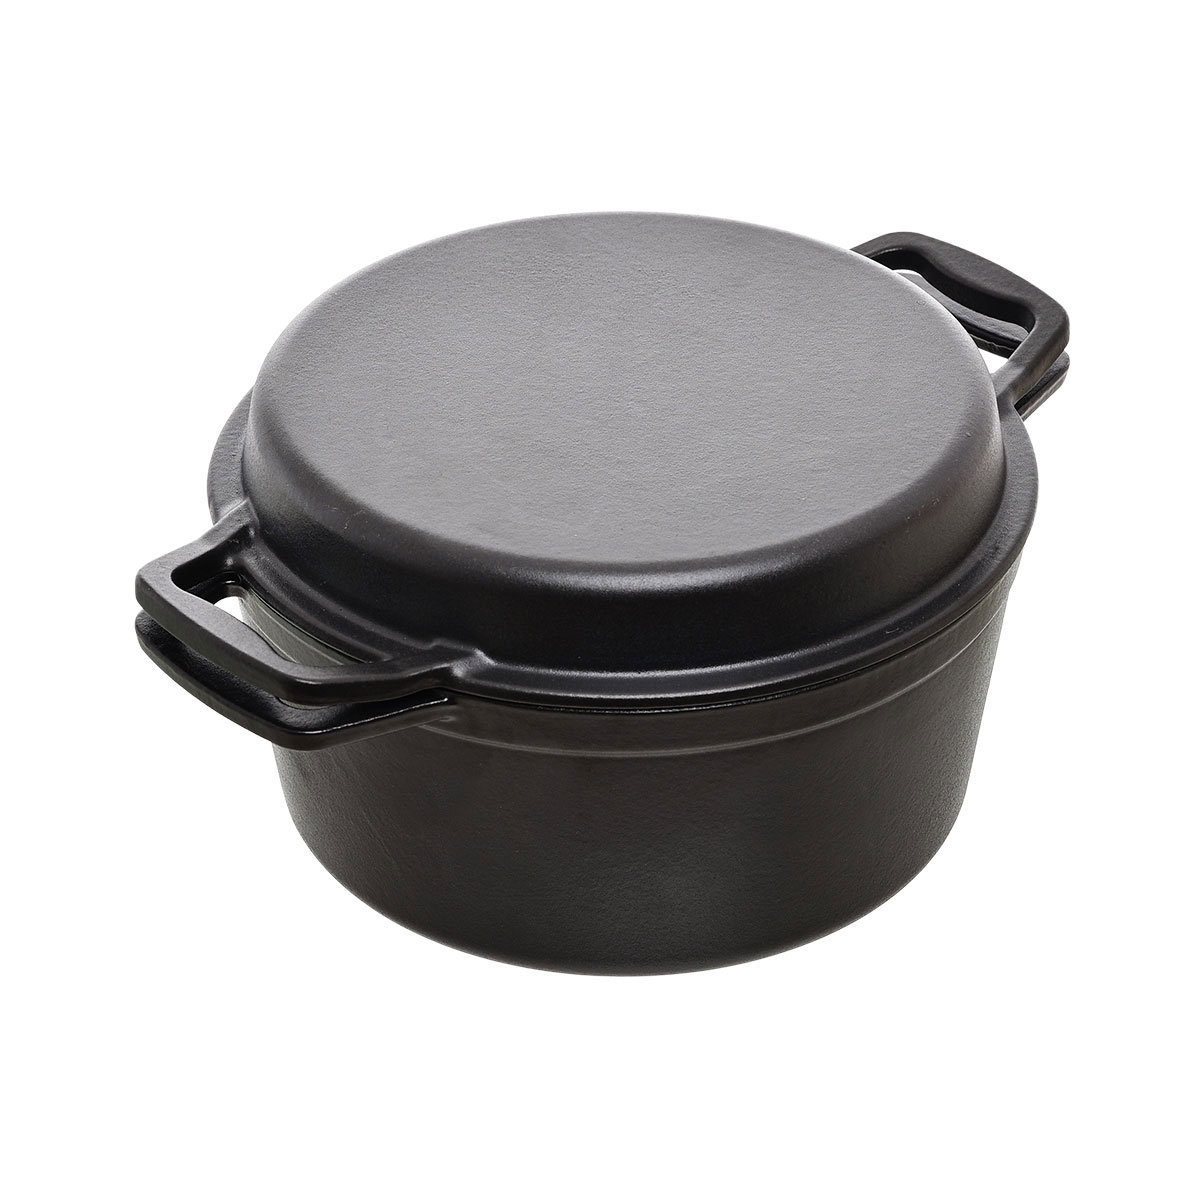 ESTIA CASSEROLE IRON 2 IN 1 CAST IRON 25CM WITH FRYING PAN LID